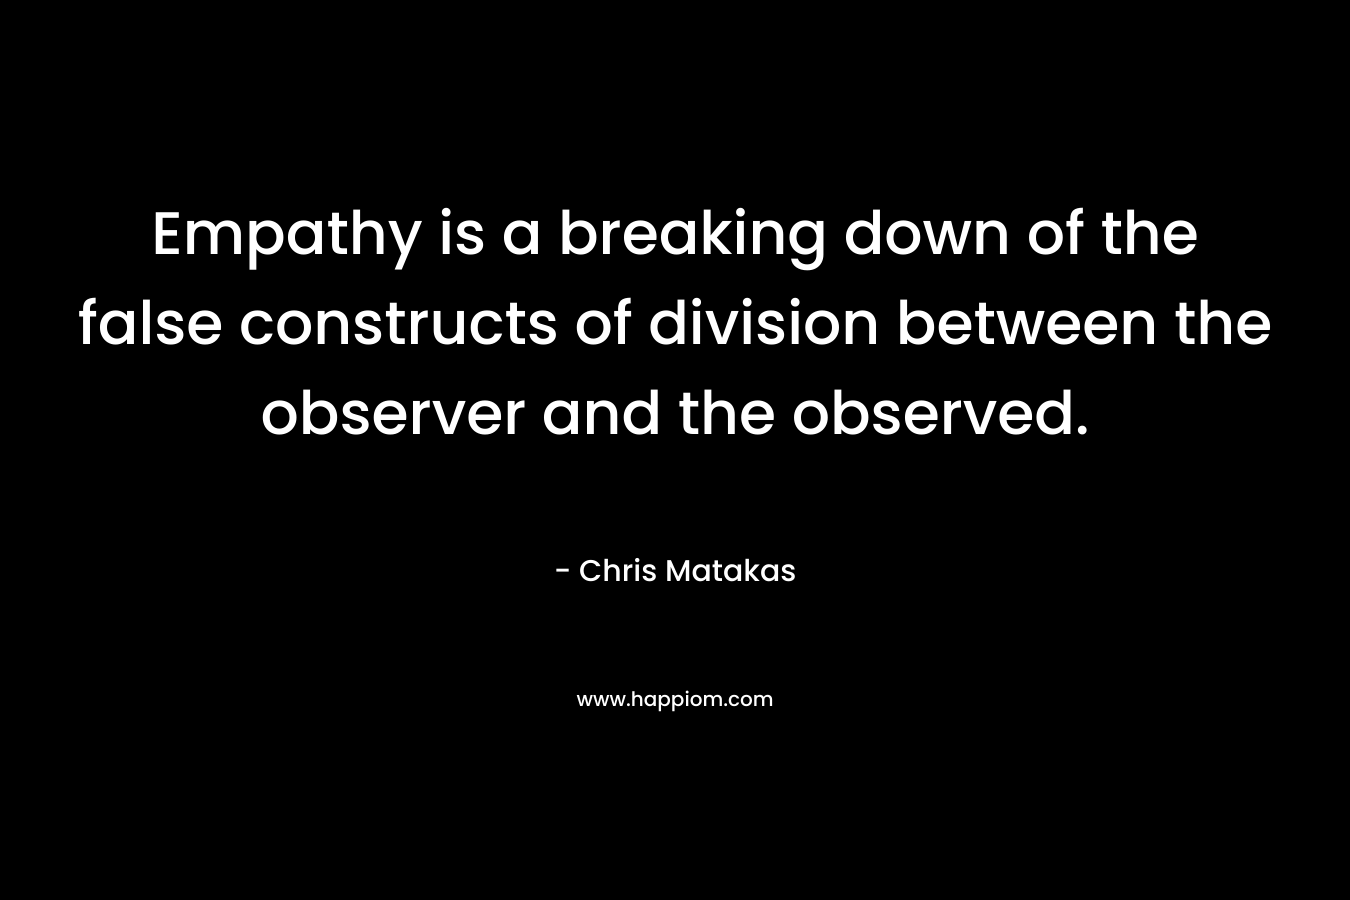 Empathy is a breaking down of the false constructs of division between the observer and the observed. – Chris Matakas